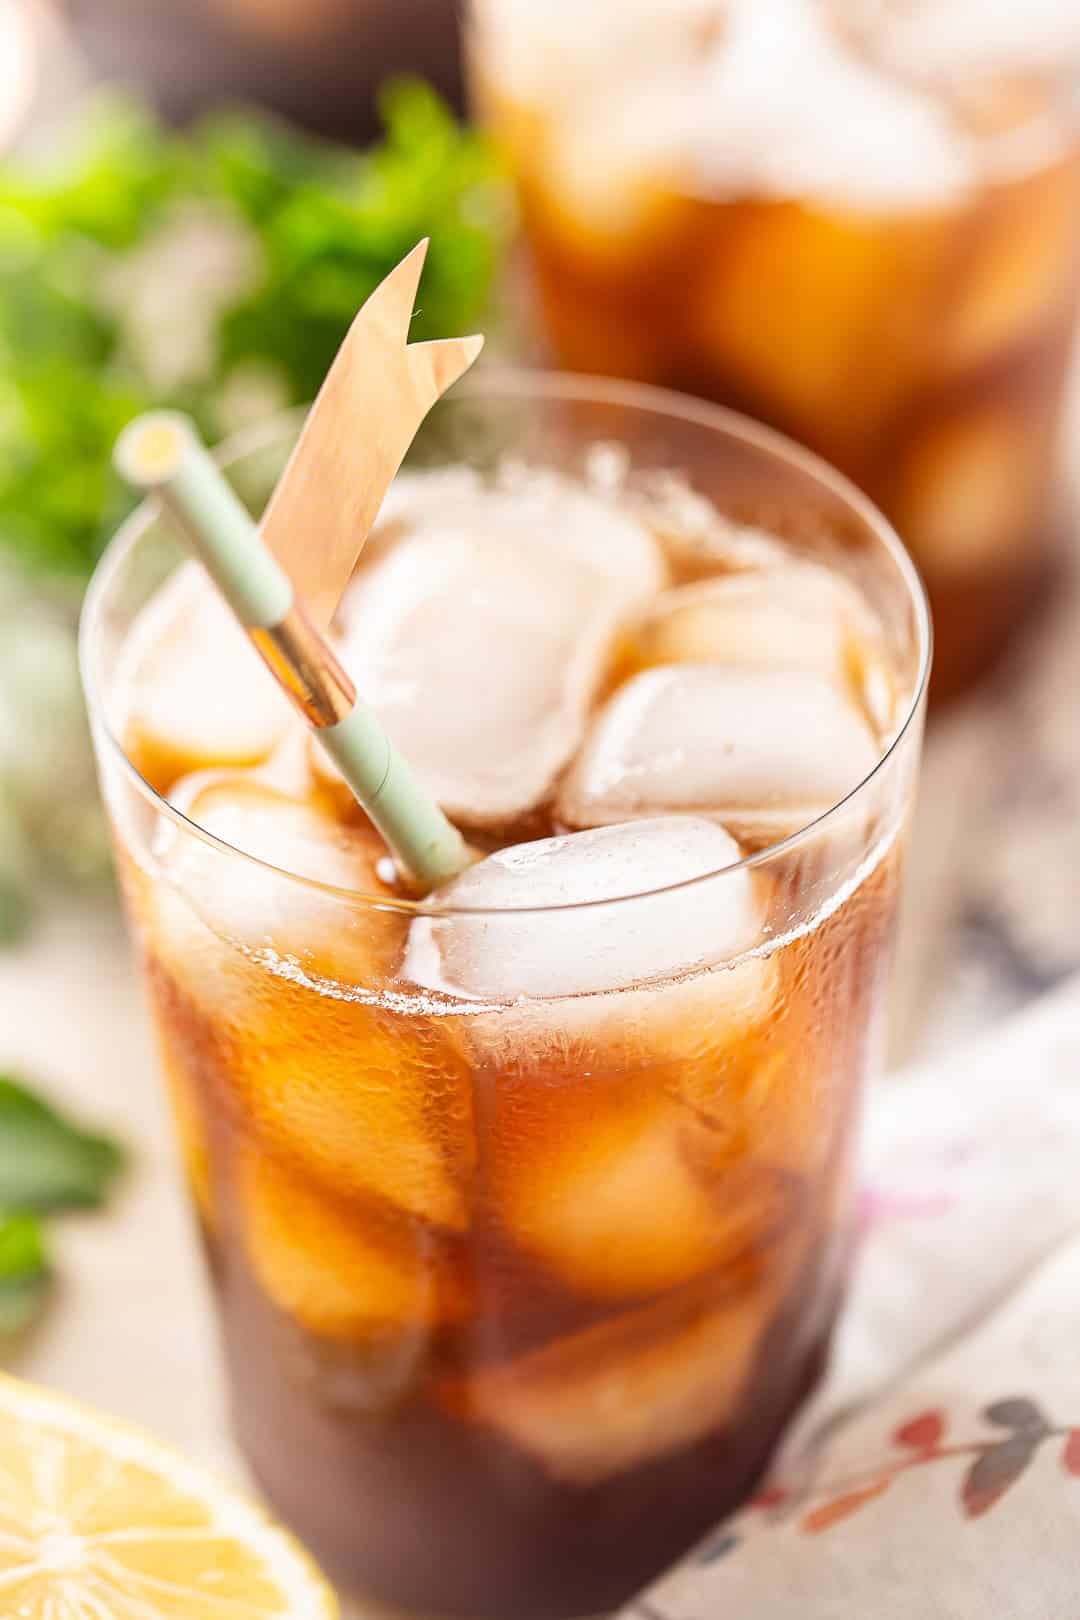 How to make iced tea with real tea and citrus, mint, or fruit.